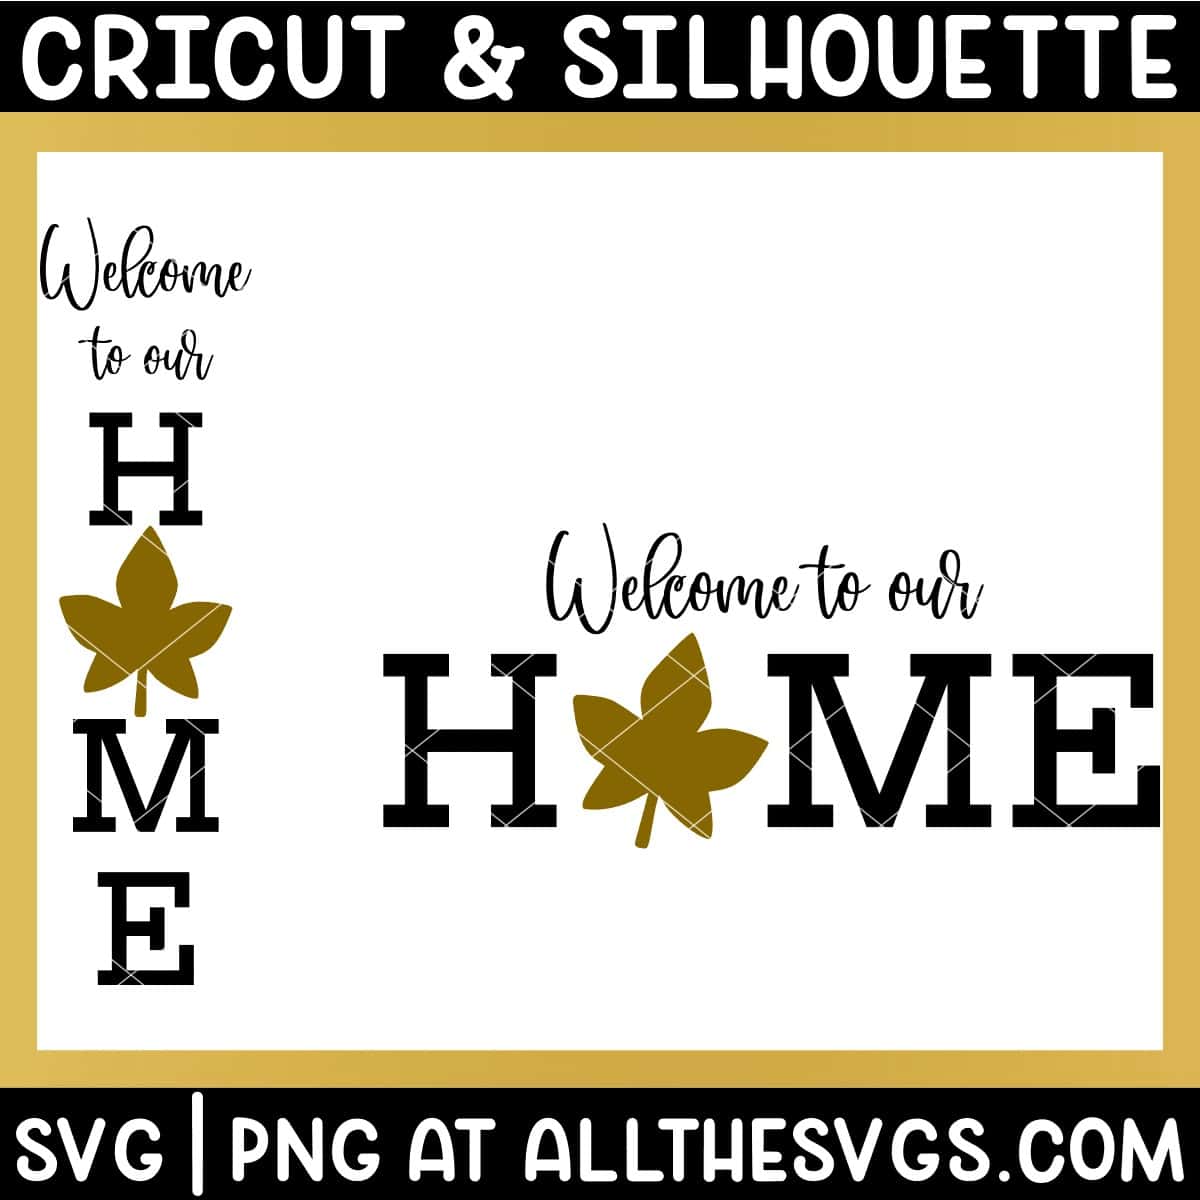 welcome to our home sign svg file with maple leaf.